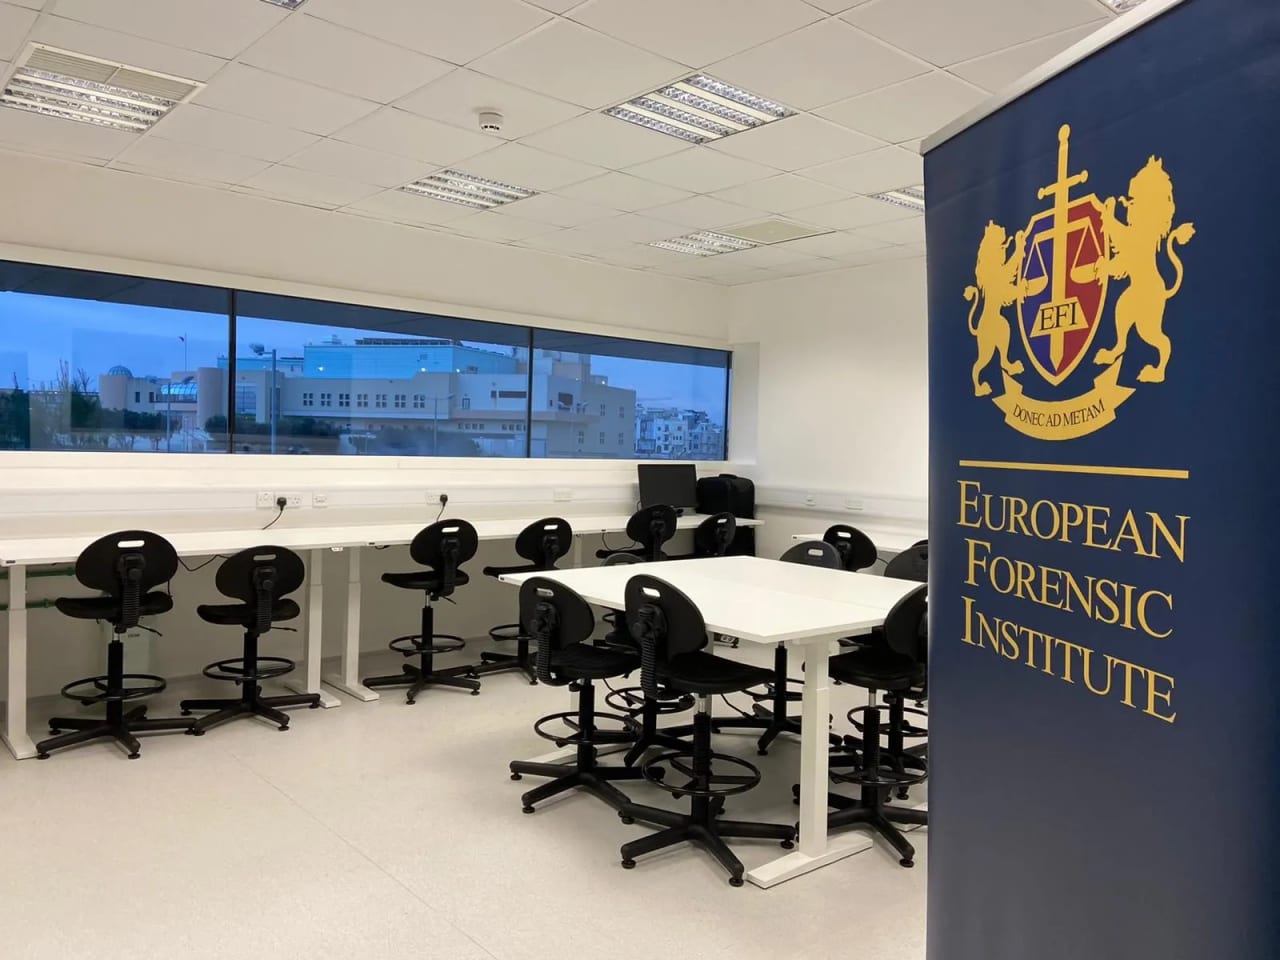 European Forensic Institute Master's in Business Management, Financial Crime and Digital Technologies